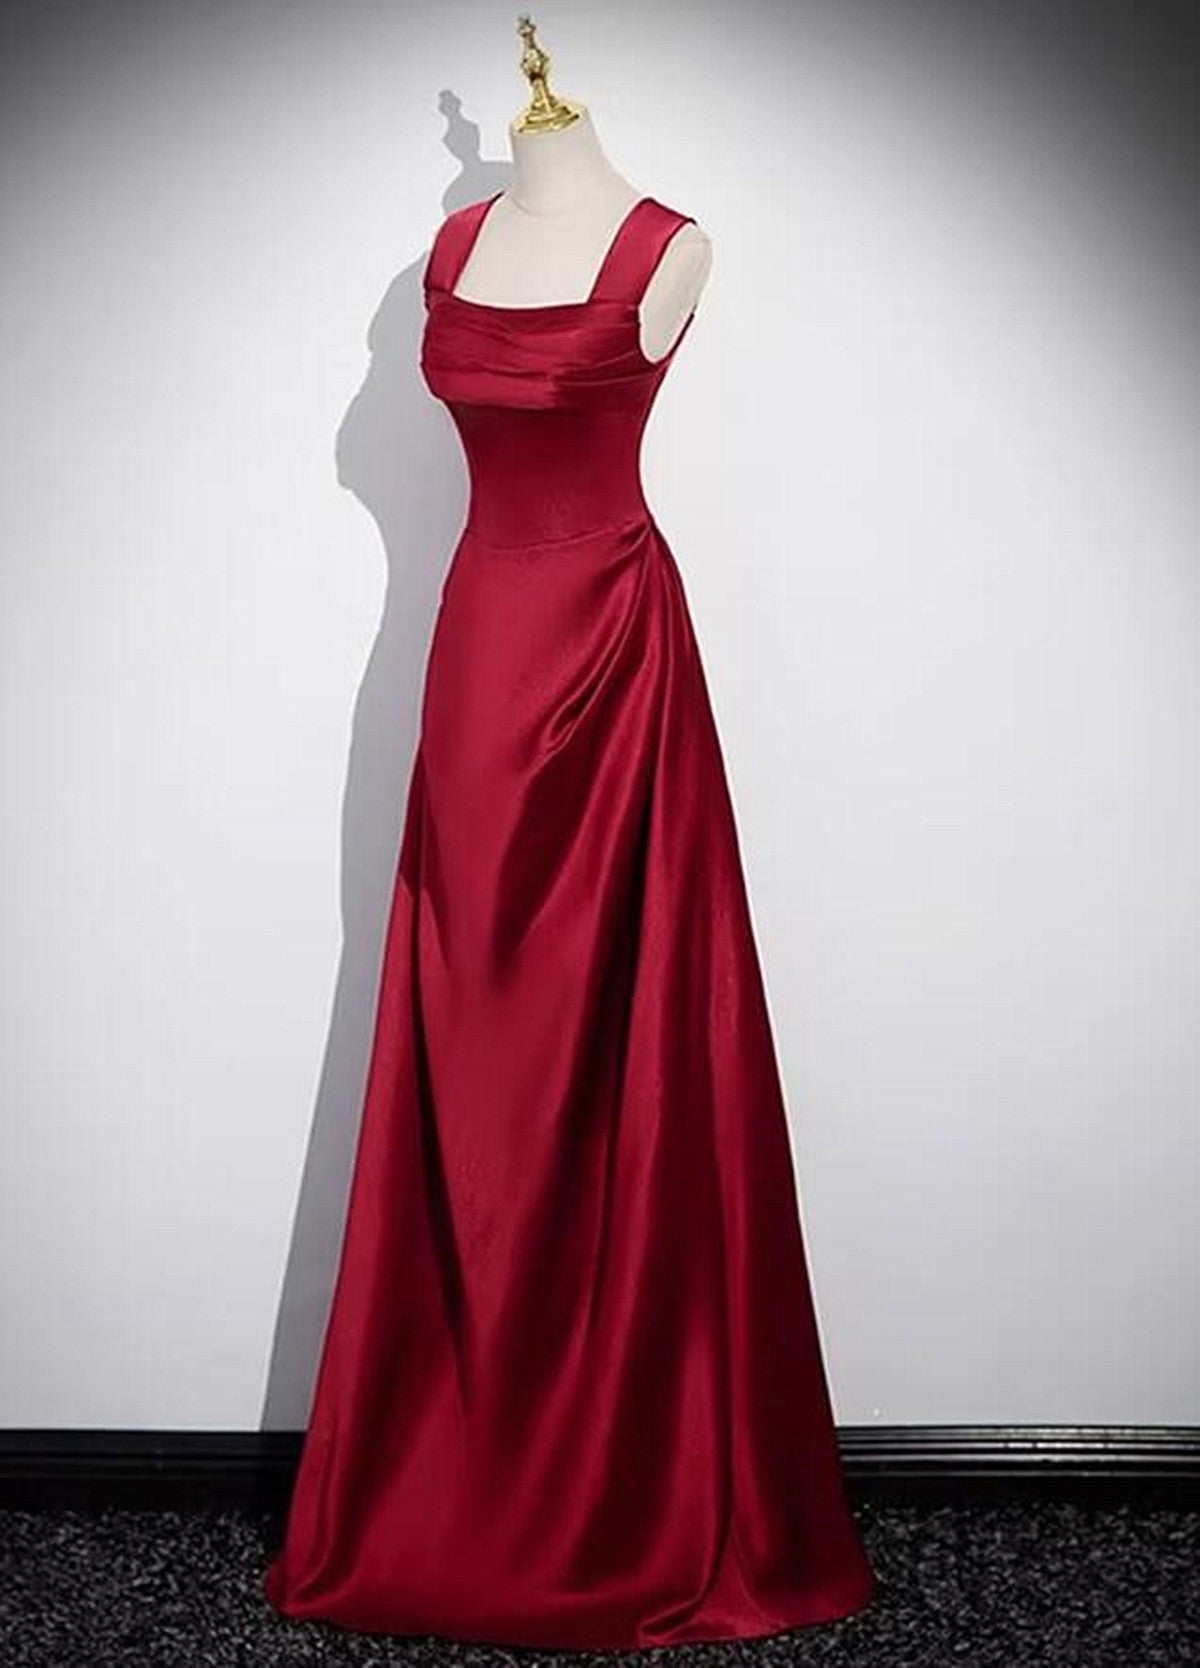 Formal Dresses For Wedding Guest, A-Line Sleeveless Wine Red Satin Evening Dress, Wine Red Long Prom Dress